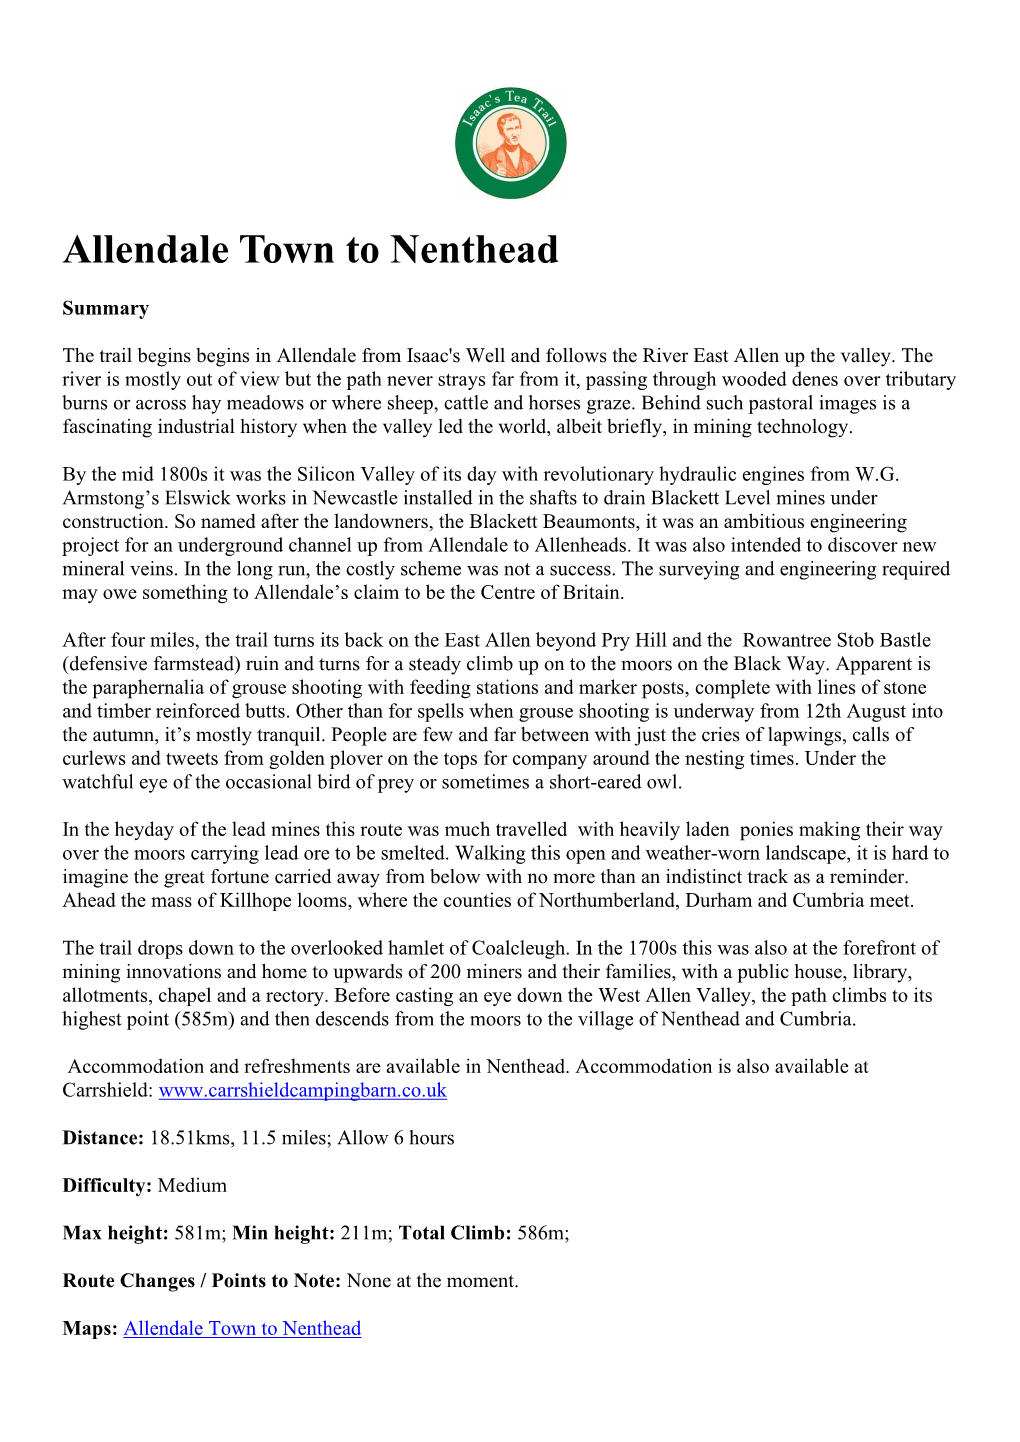 Allendale Town to Nenthead